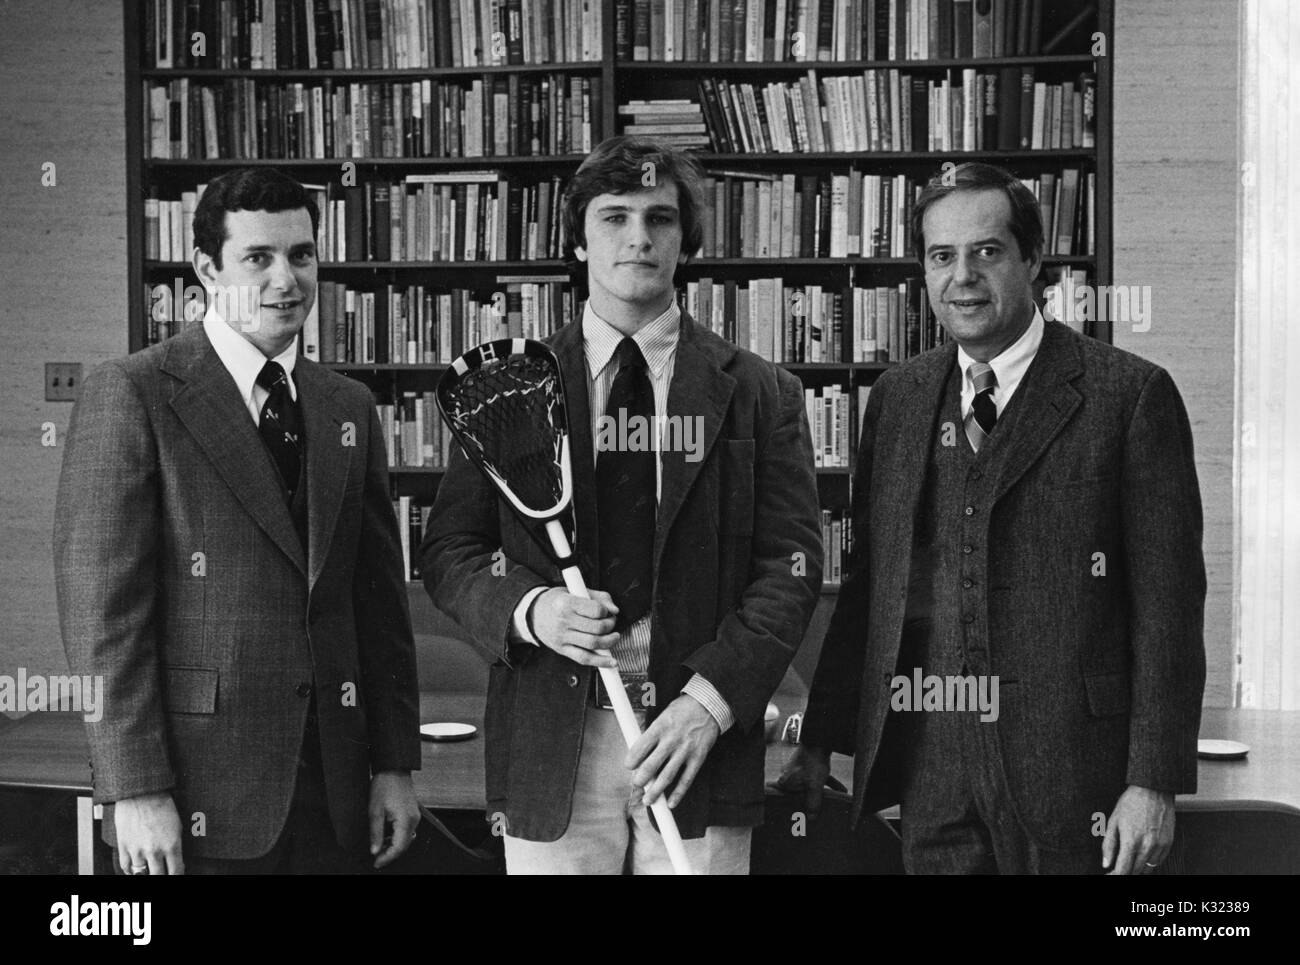 Three time All-American lacrosse player for Johns Hopkins University, Mike O'Neill, wears a blazer and holds his stick to pose with head coach for men's lacrosse, Henry Ciccarone, to his left, and Steven Muller, president of Johns Hopkins University, to his right, in front of a wall of books, Baltimore, Maryland, May, 1978. Stock Photo